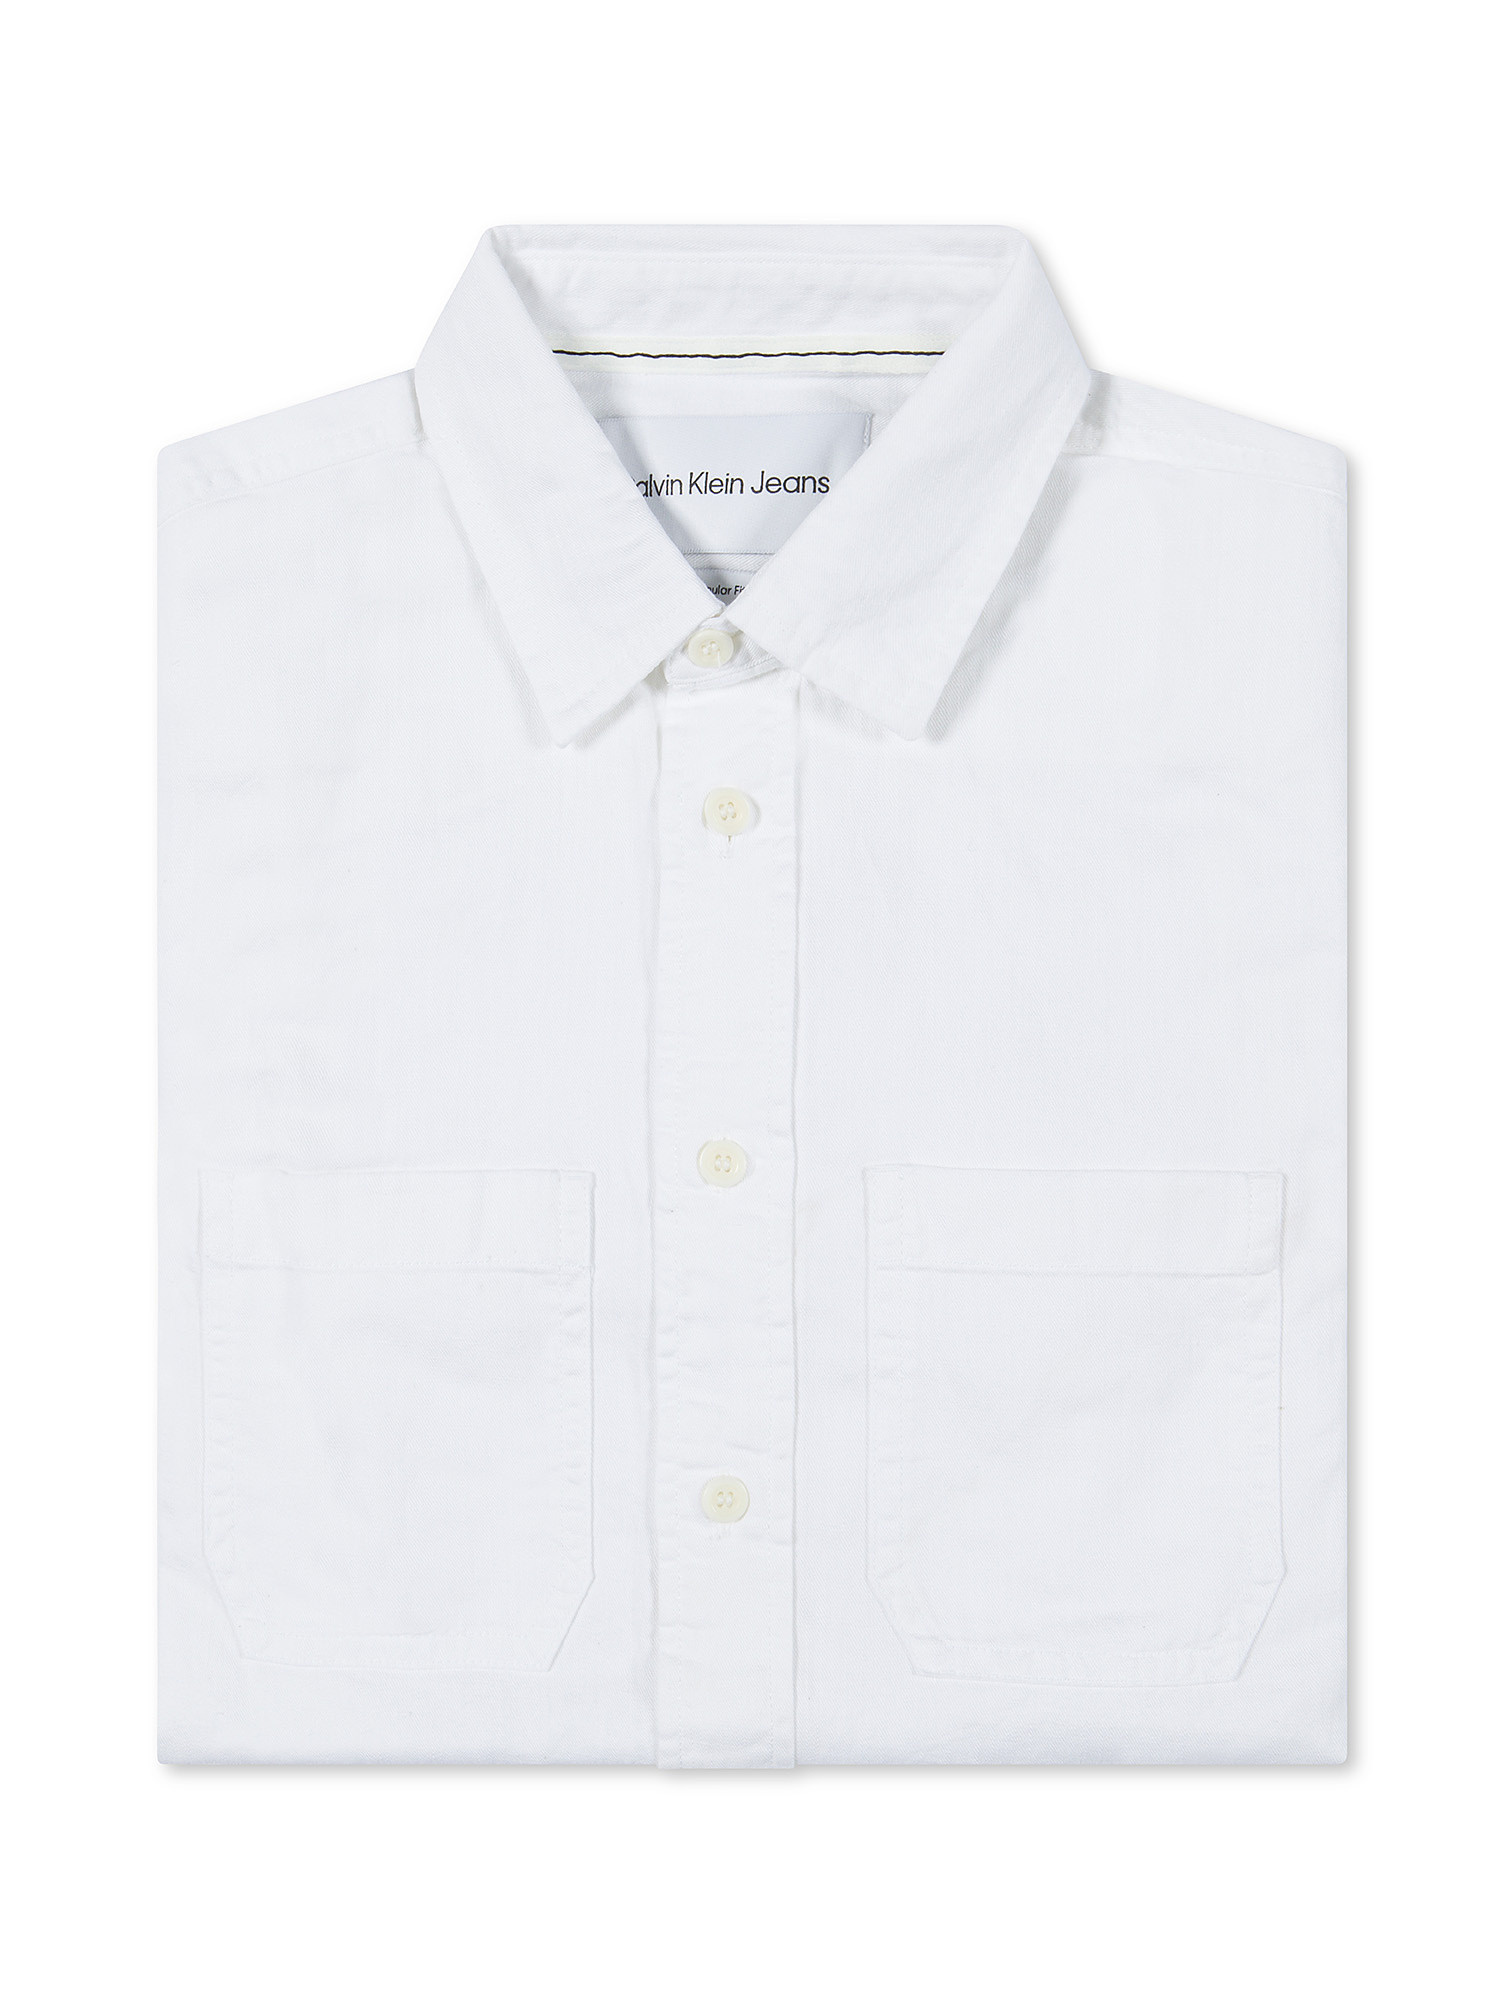 Calvin Klein Jeans - Shirt with double pocket, White, large image number 2